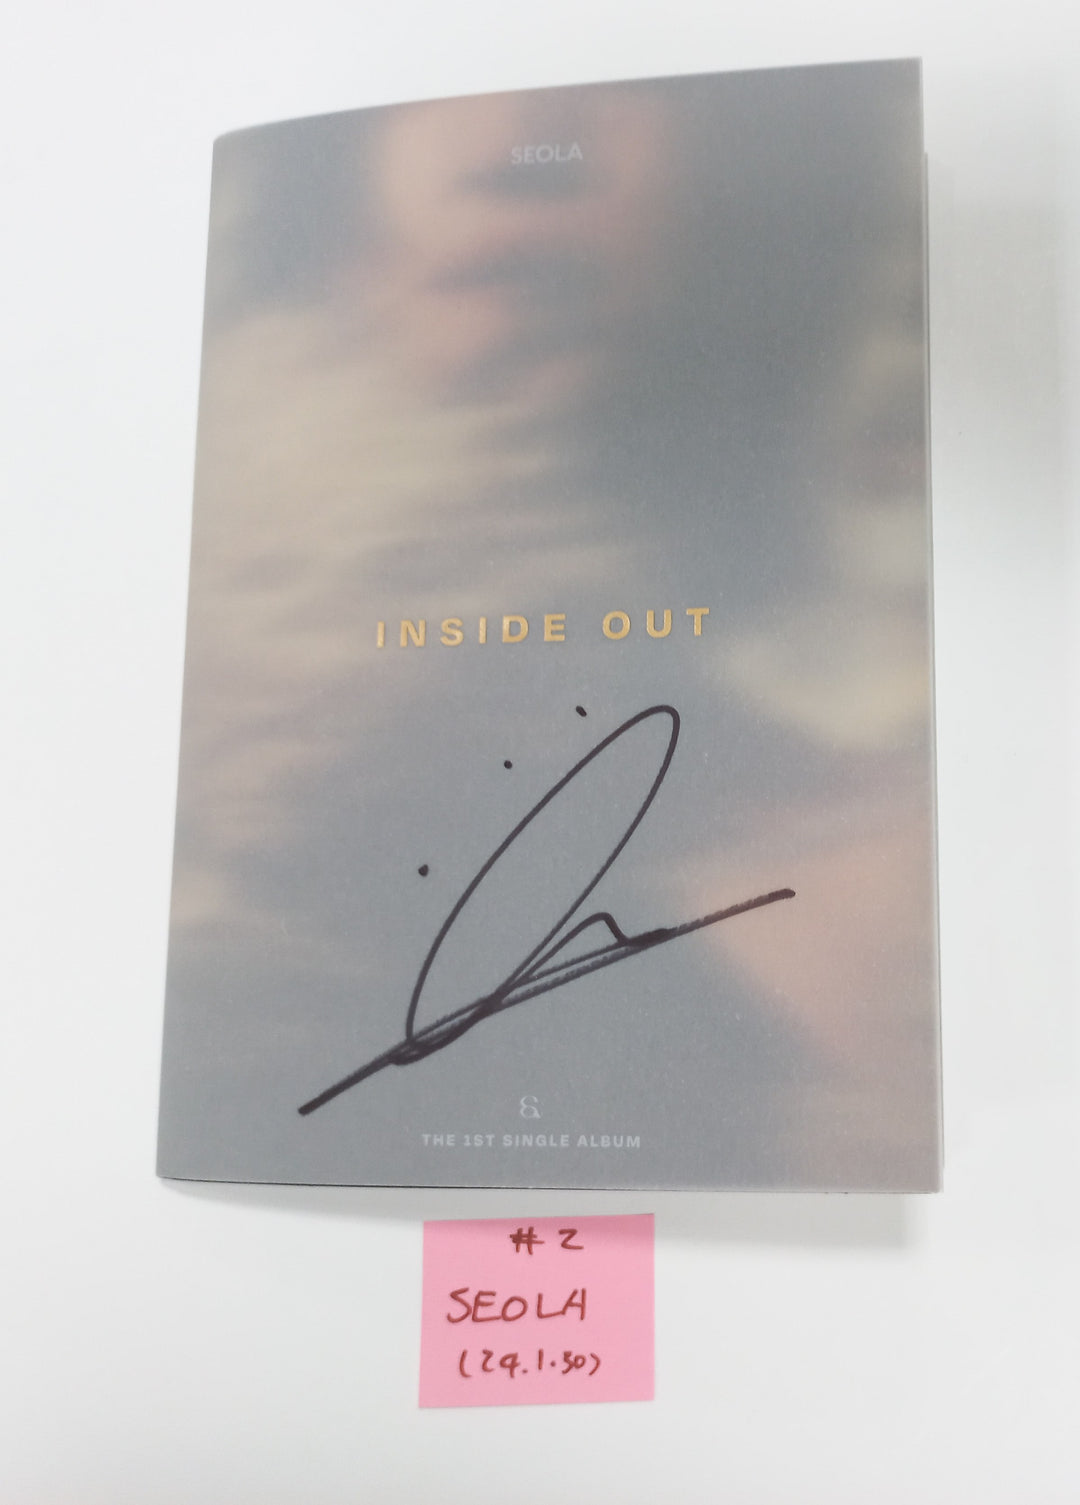 Seola (Of WJSN) "Inside Out" 1st Mini - Hand Autographed(Signed) Promo Album [24.1.30]